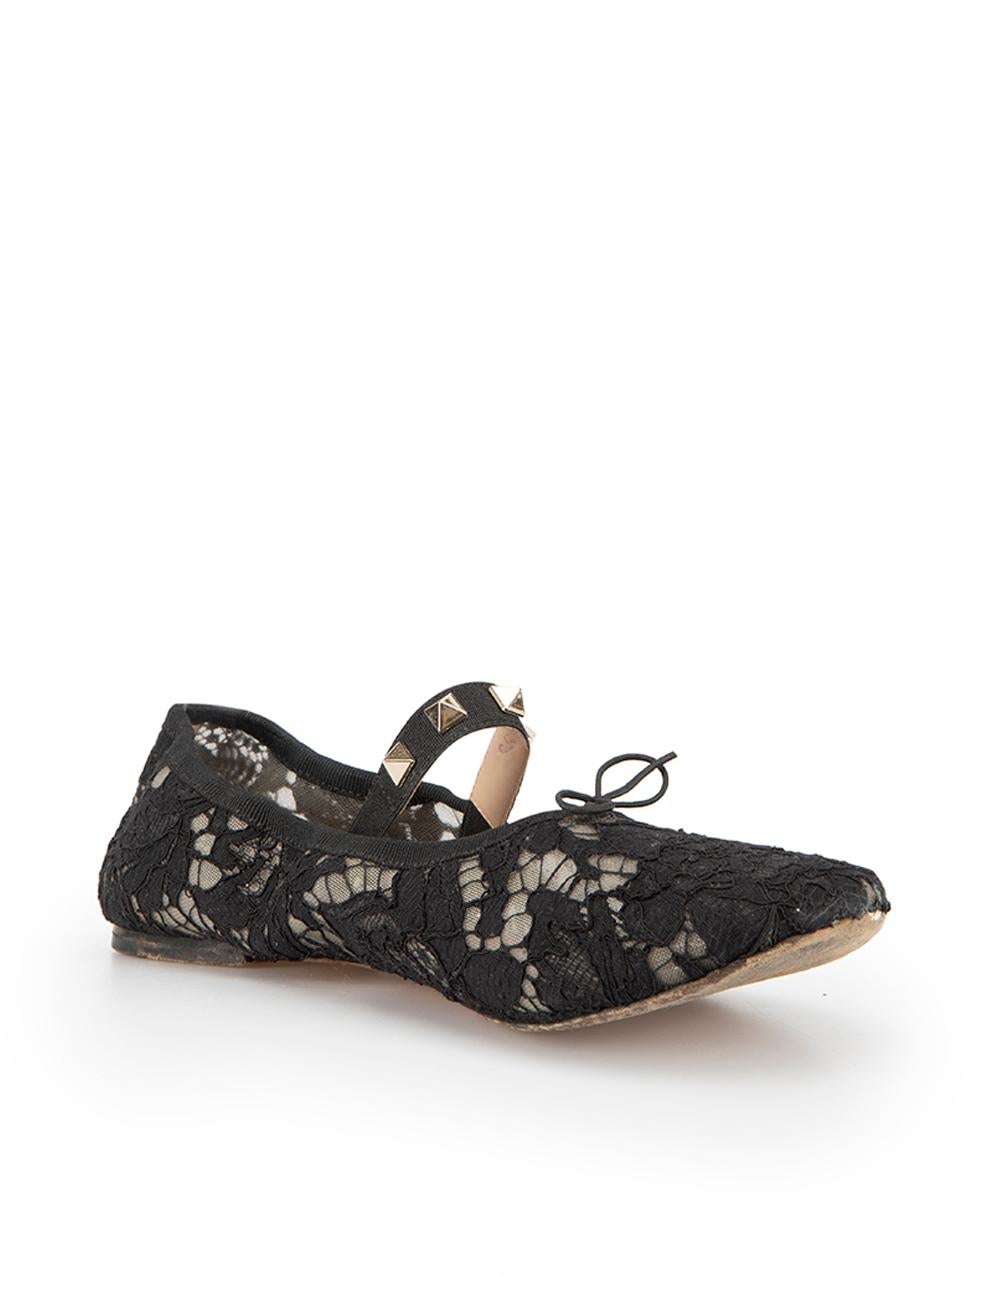 CONDITION is Good. General wear to Ballet Flats is evident. Moderate signs of wear to outer soles on this used Valentino designer resale item.



Details


Black

Lace

Ballet flats

Round-toe

Bow embellishment

Gold tone studded elastic



 

Made